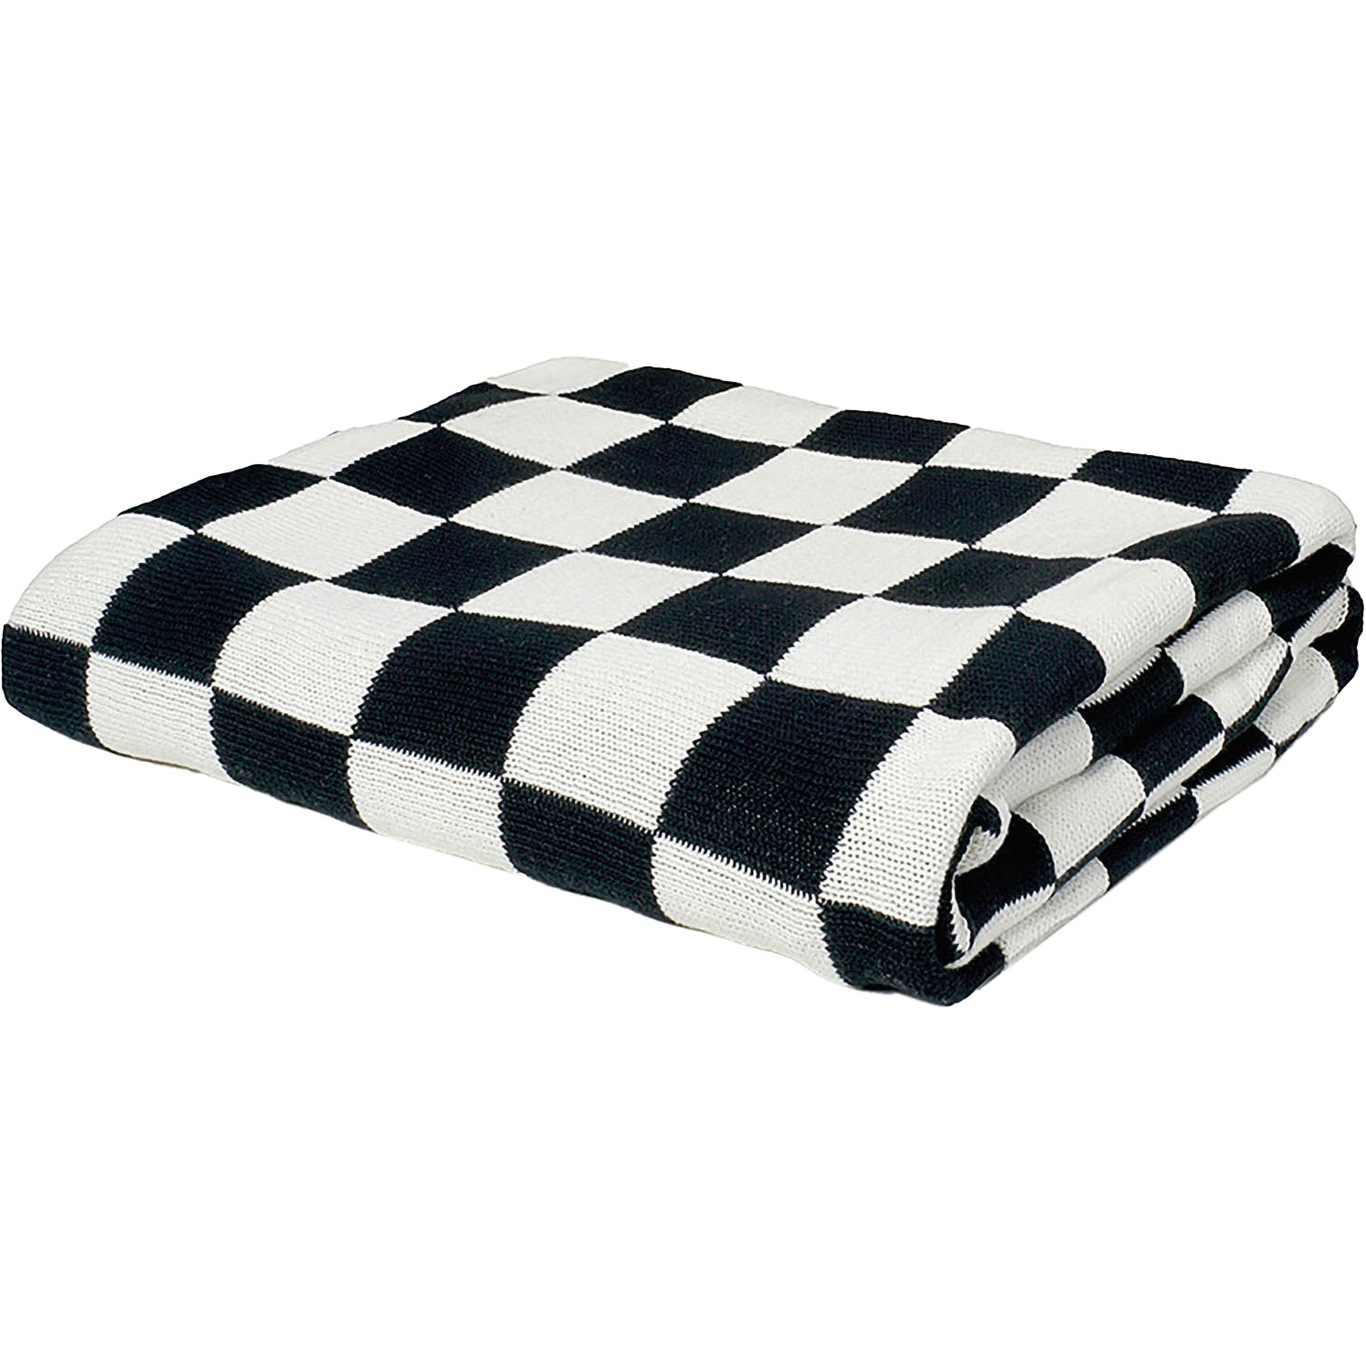 Knitted Check Throw 130x160 cm, Black